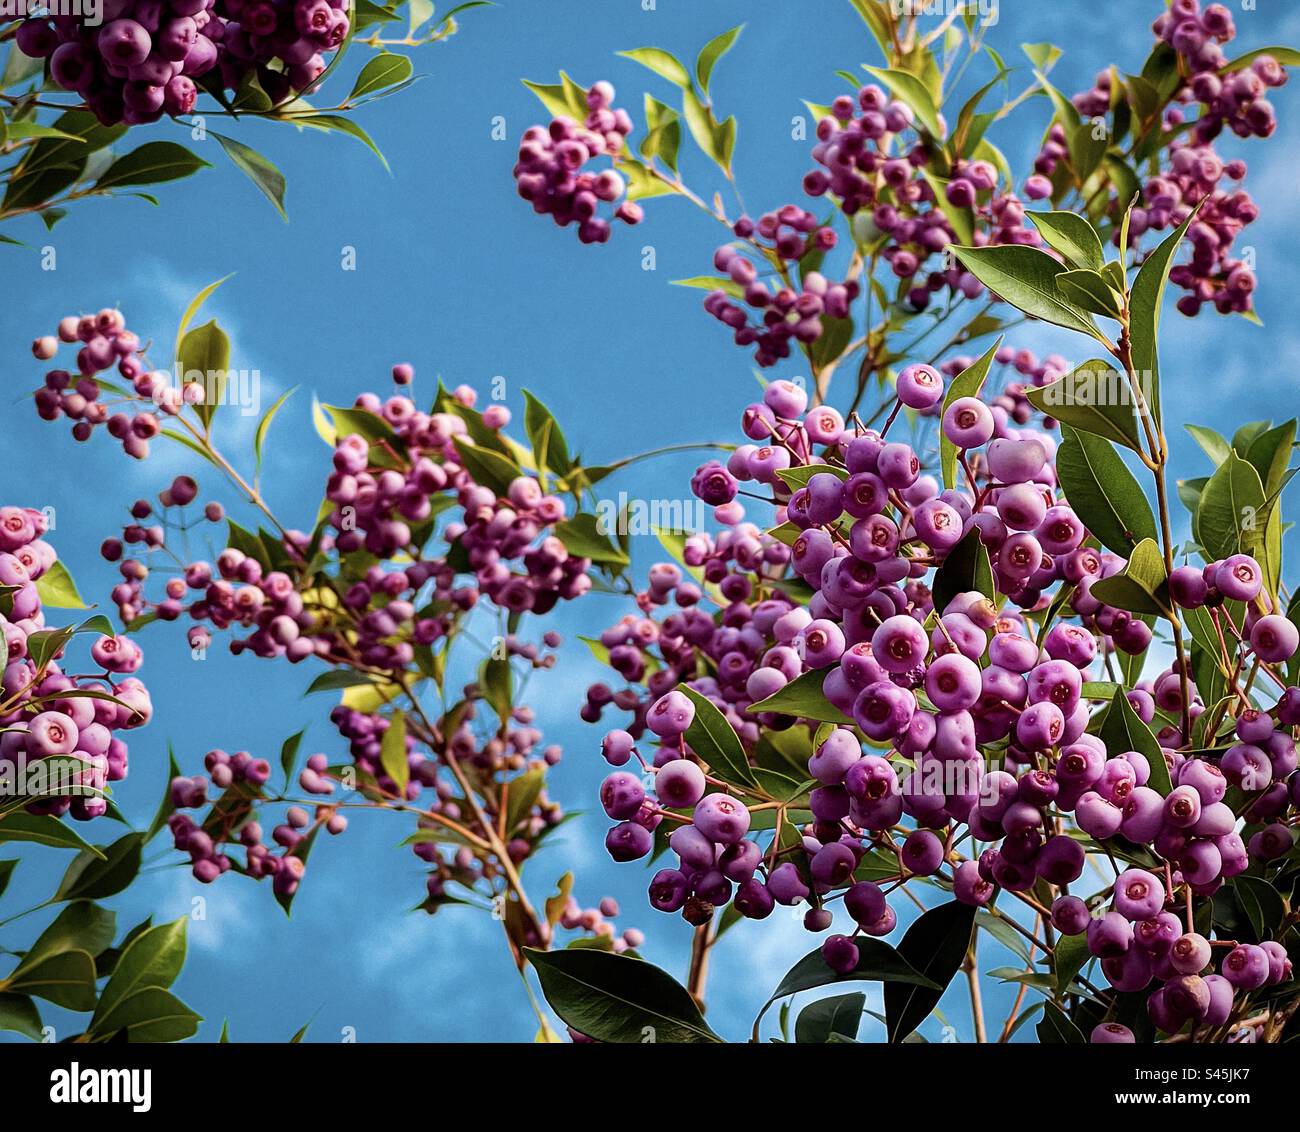 Artistic shot of edible maroon lilly pilly berries of Syzygium smithii, an evergreen native Australian shrub of Myrtaceae family against blue sky with clouds. Traditional bush tucker. Medicinal berry. Stock Photo